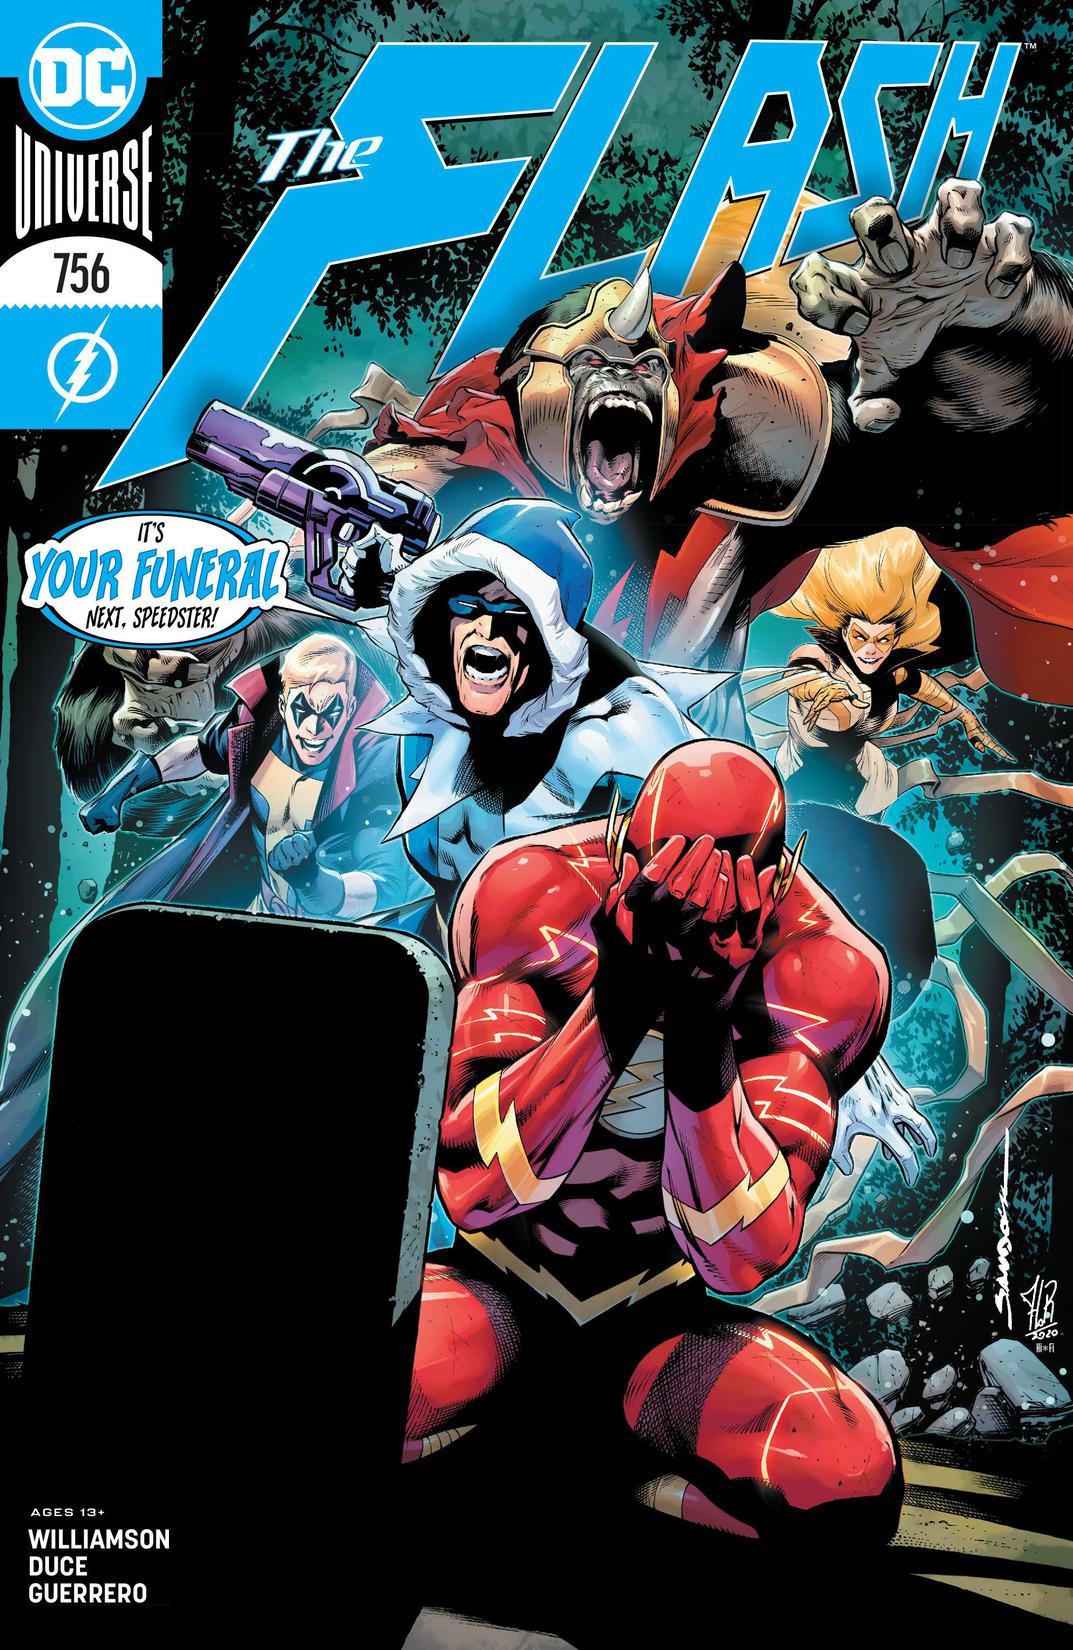 The Flash (2016-) #756 preview images